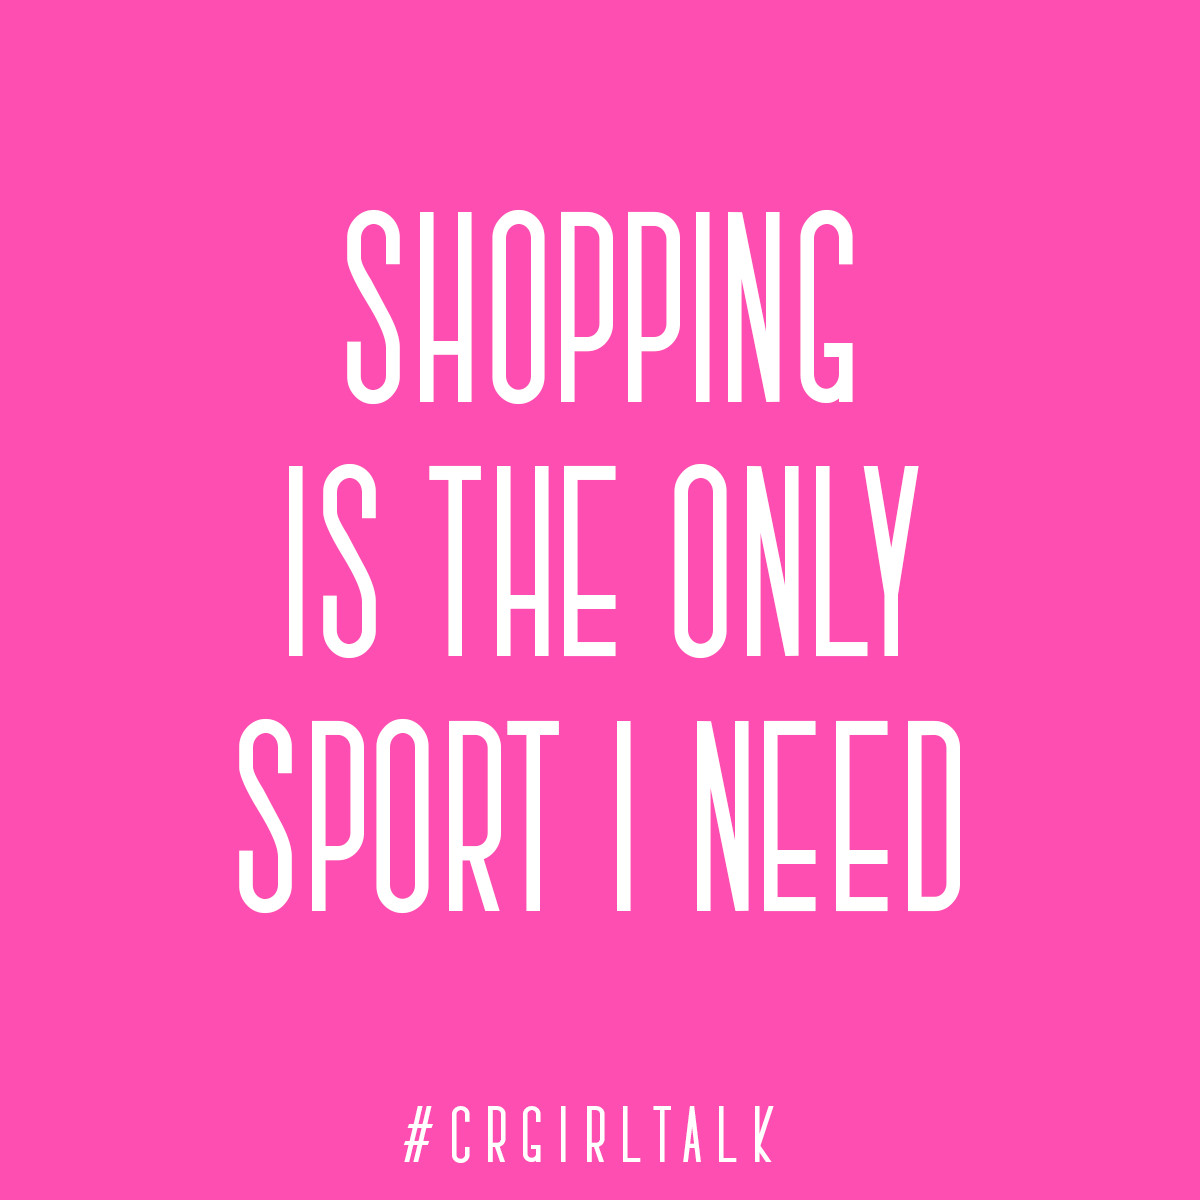 Funny Retail Quotes
 Shopping is the only sport I need CRGirlTalk